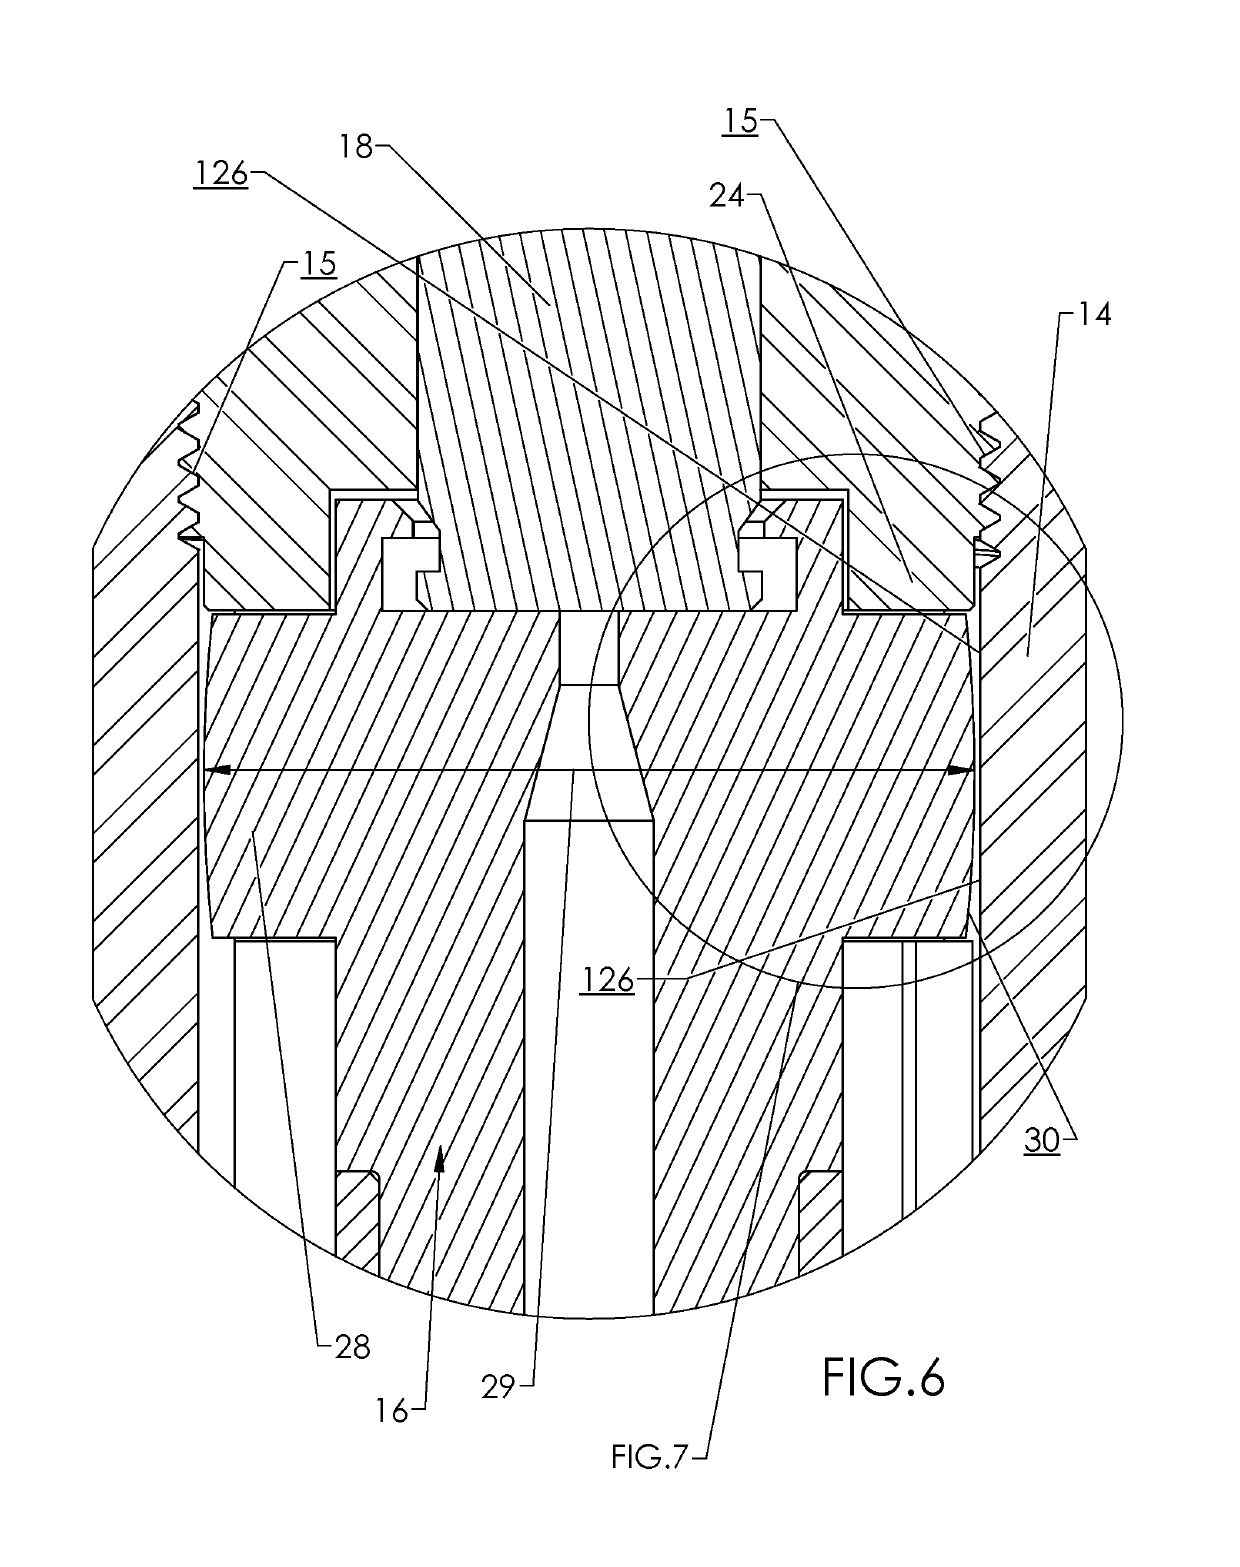 Firearms and components thereof, for enhanced axial alignment of barrel with action